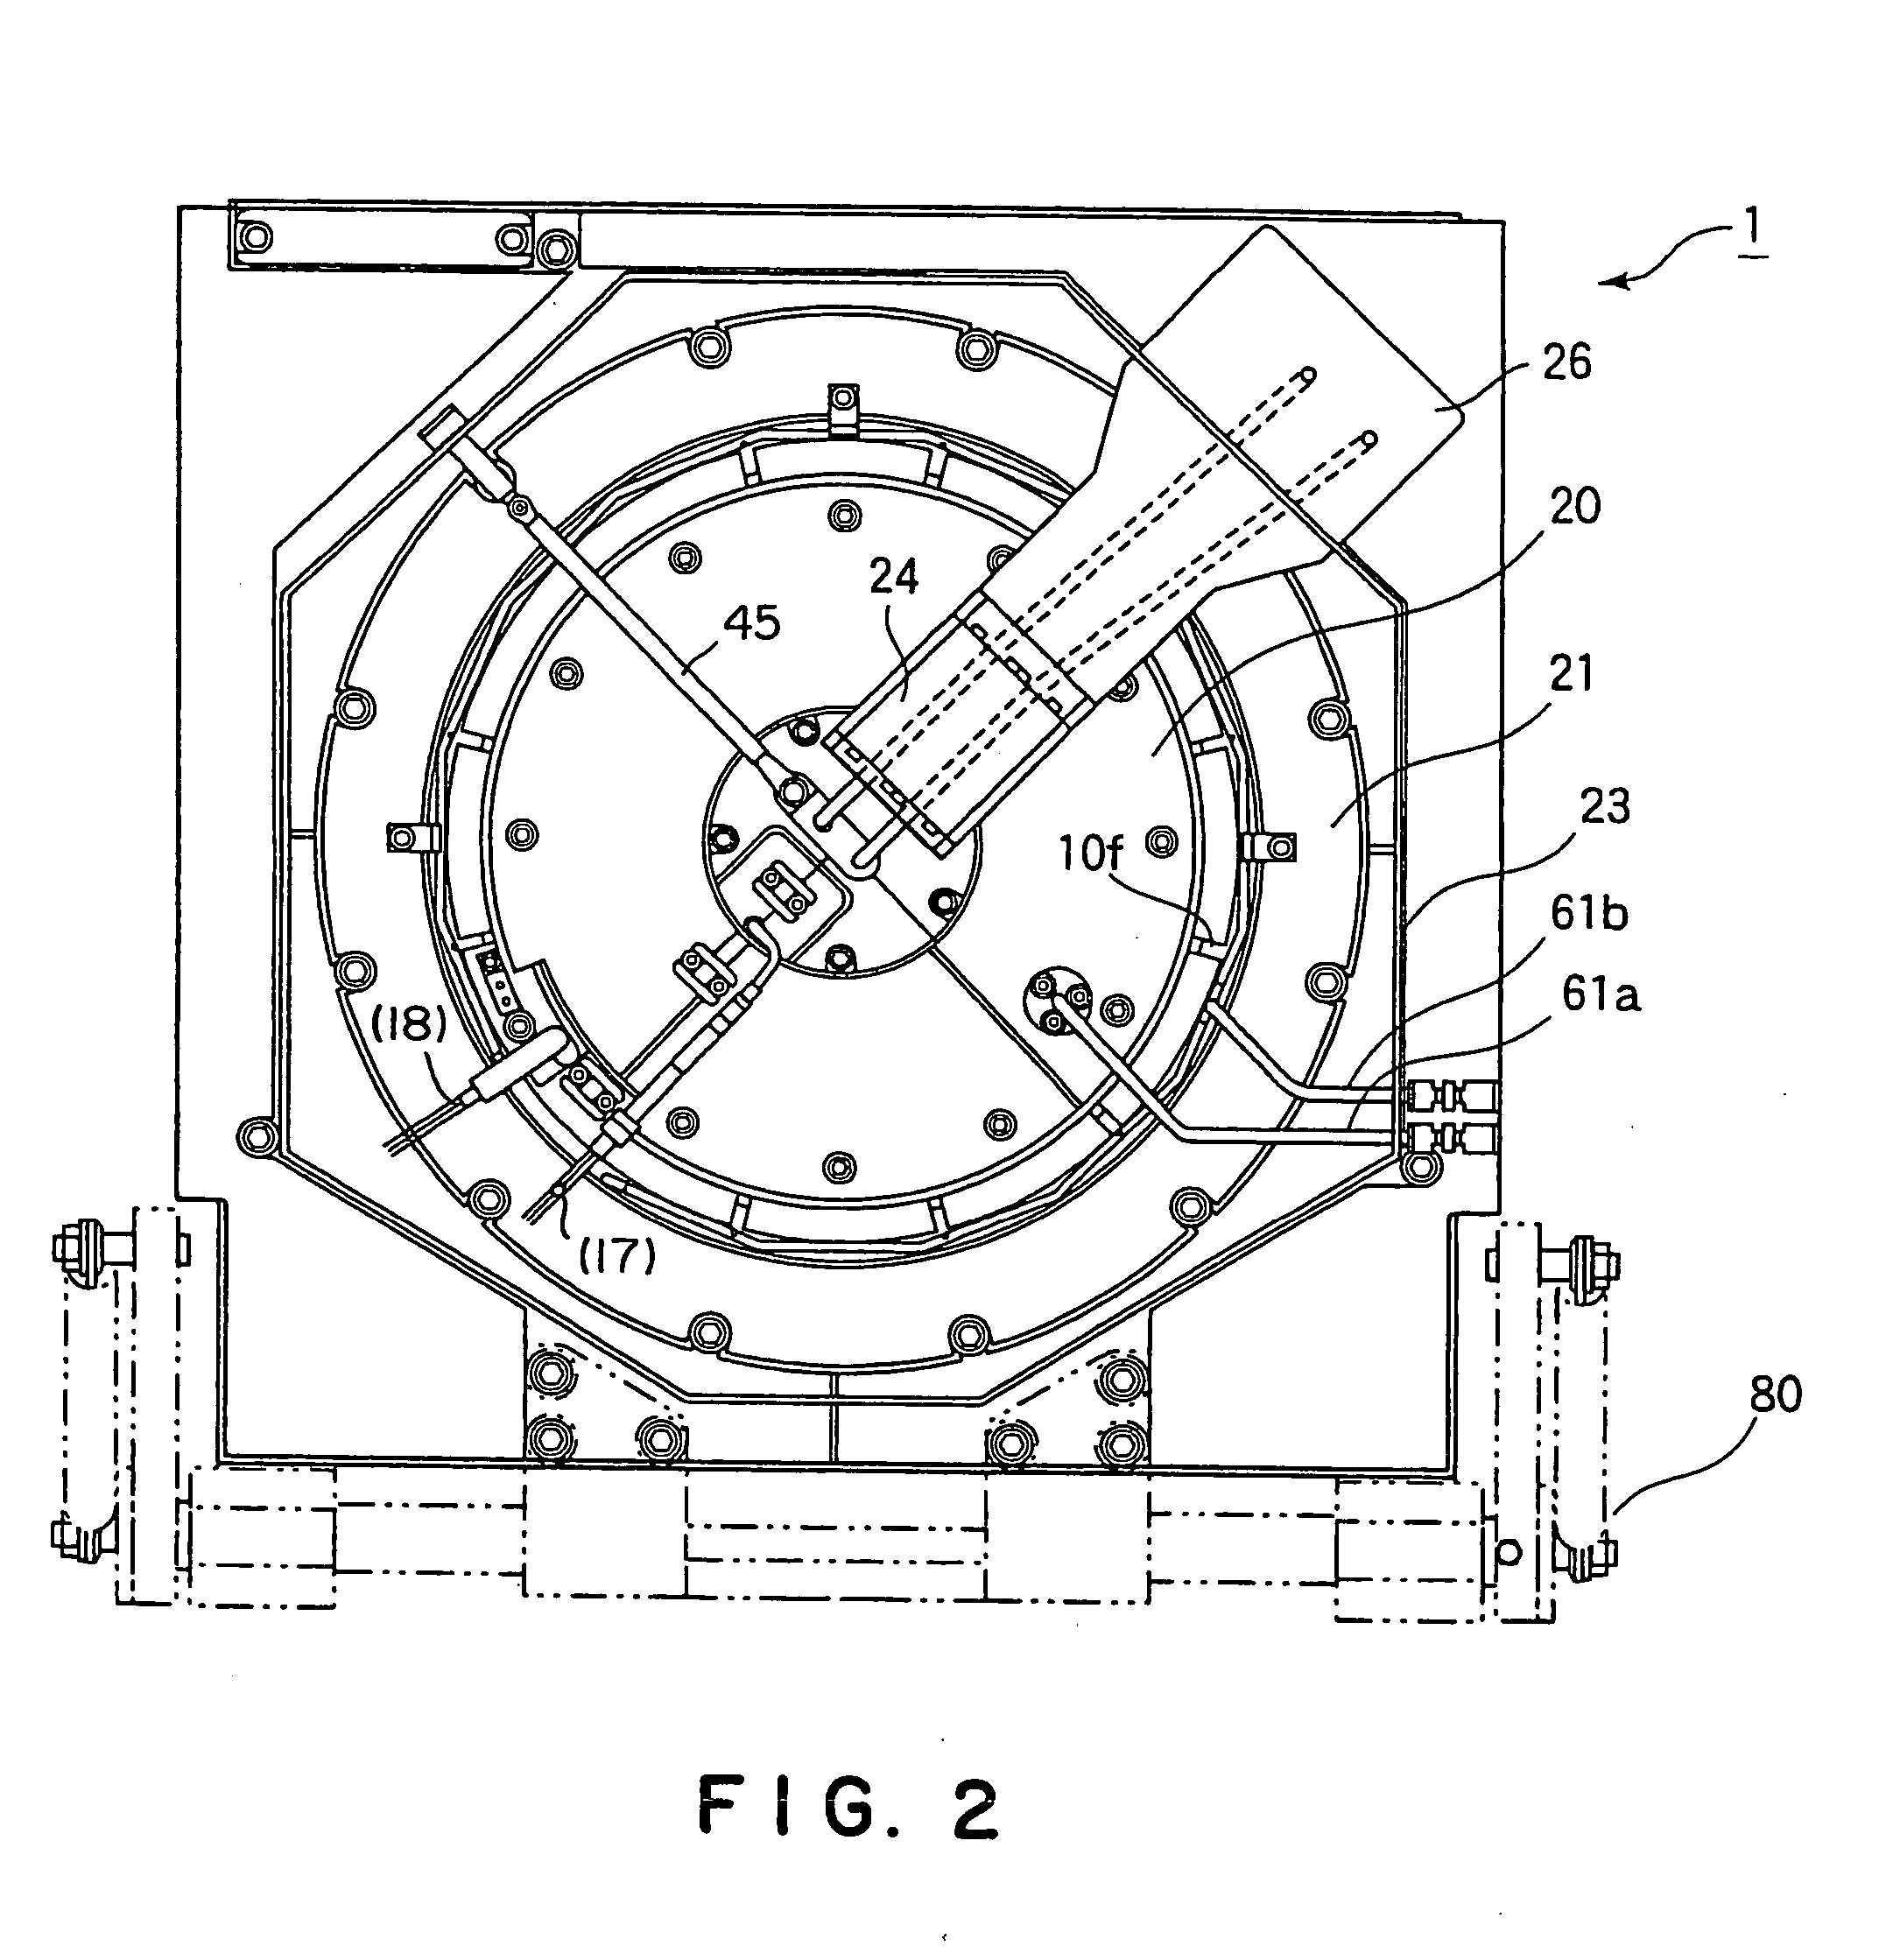 Film forming device